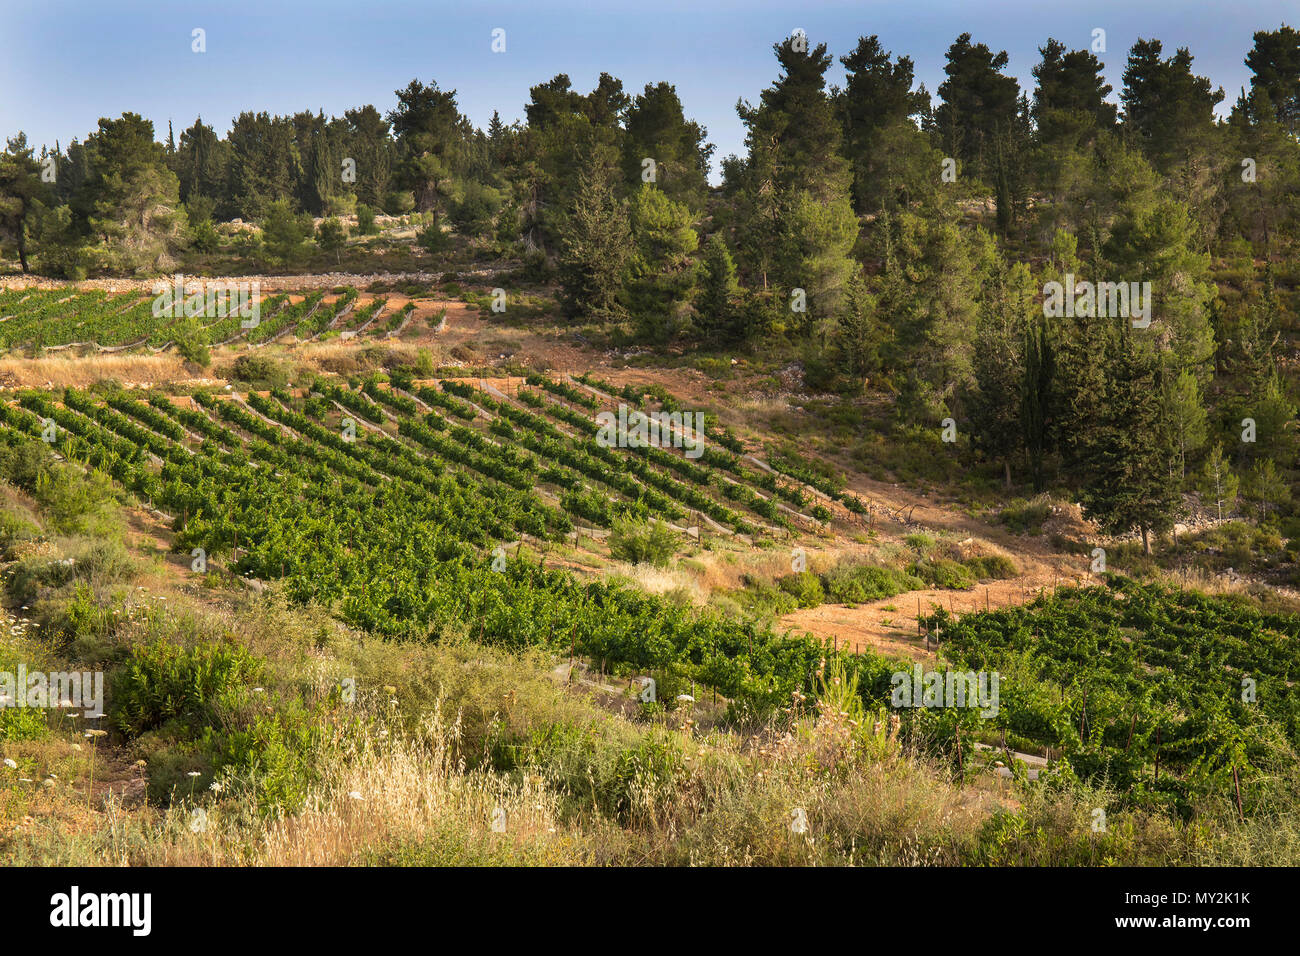 A vineyard cultivated in the midst of a pine forest near Jerusalem, Israel Stock Photo